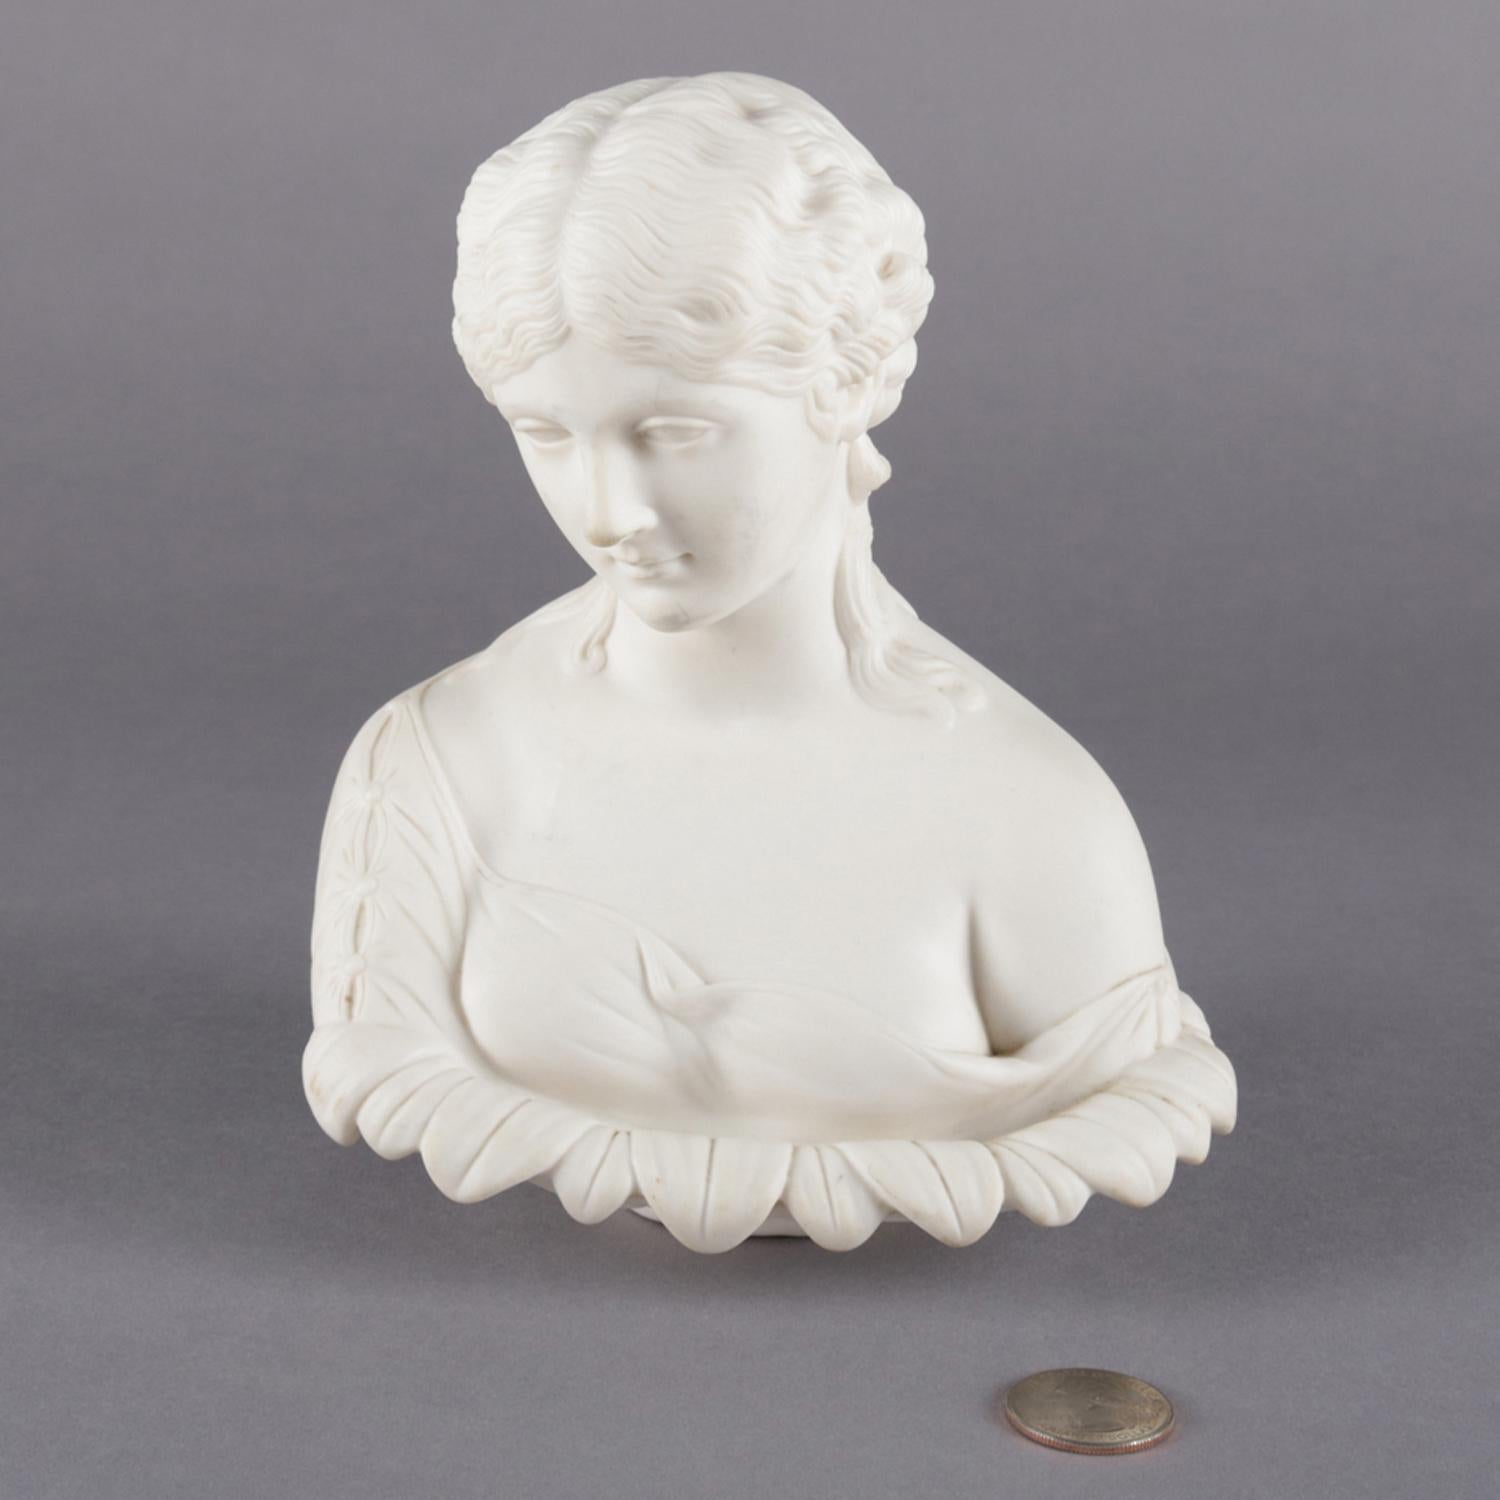 English Copeland School Parian portrait bust sculpture depicts classical woman framed by floral petals, reminiscent of a flower, circa 1890.

Measures: 8